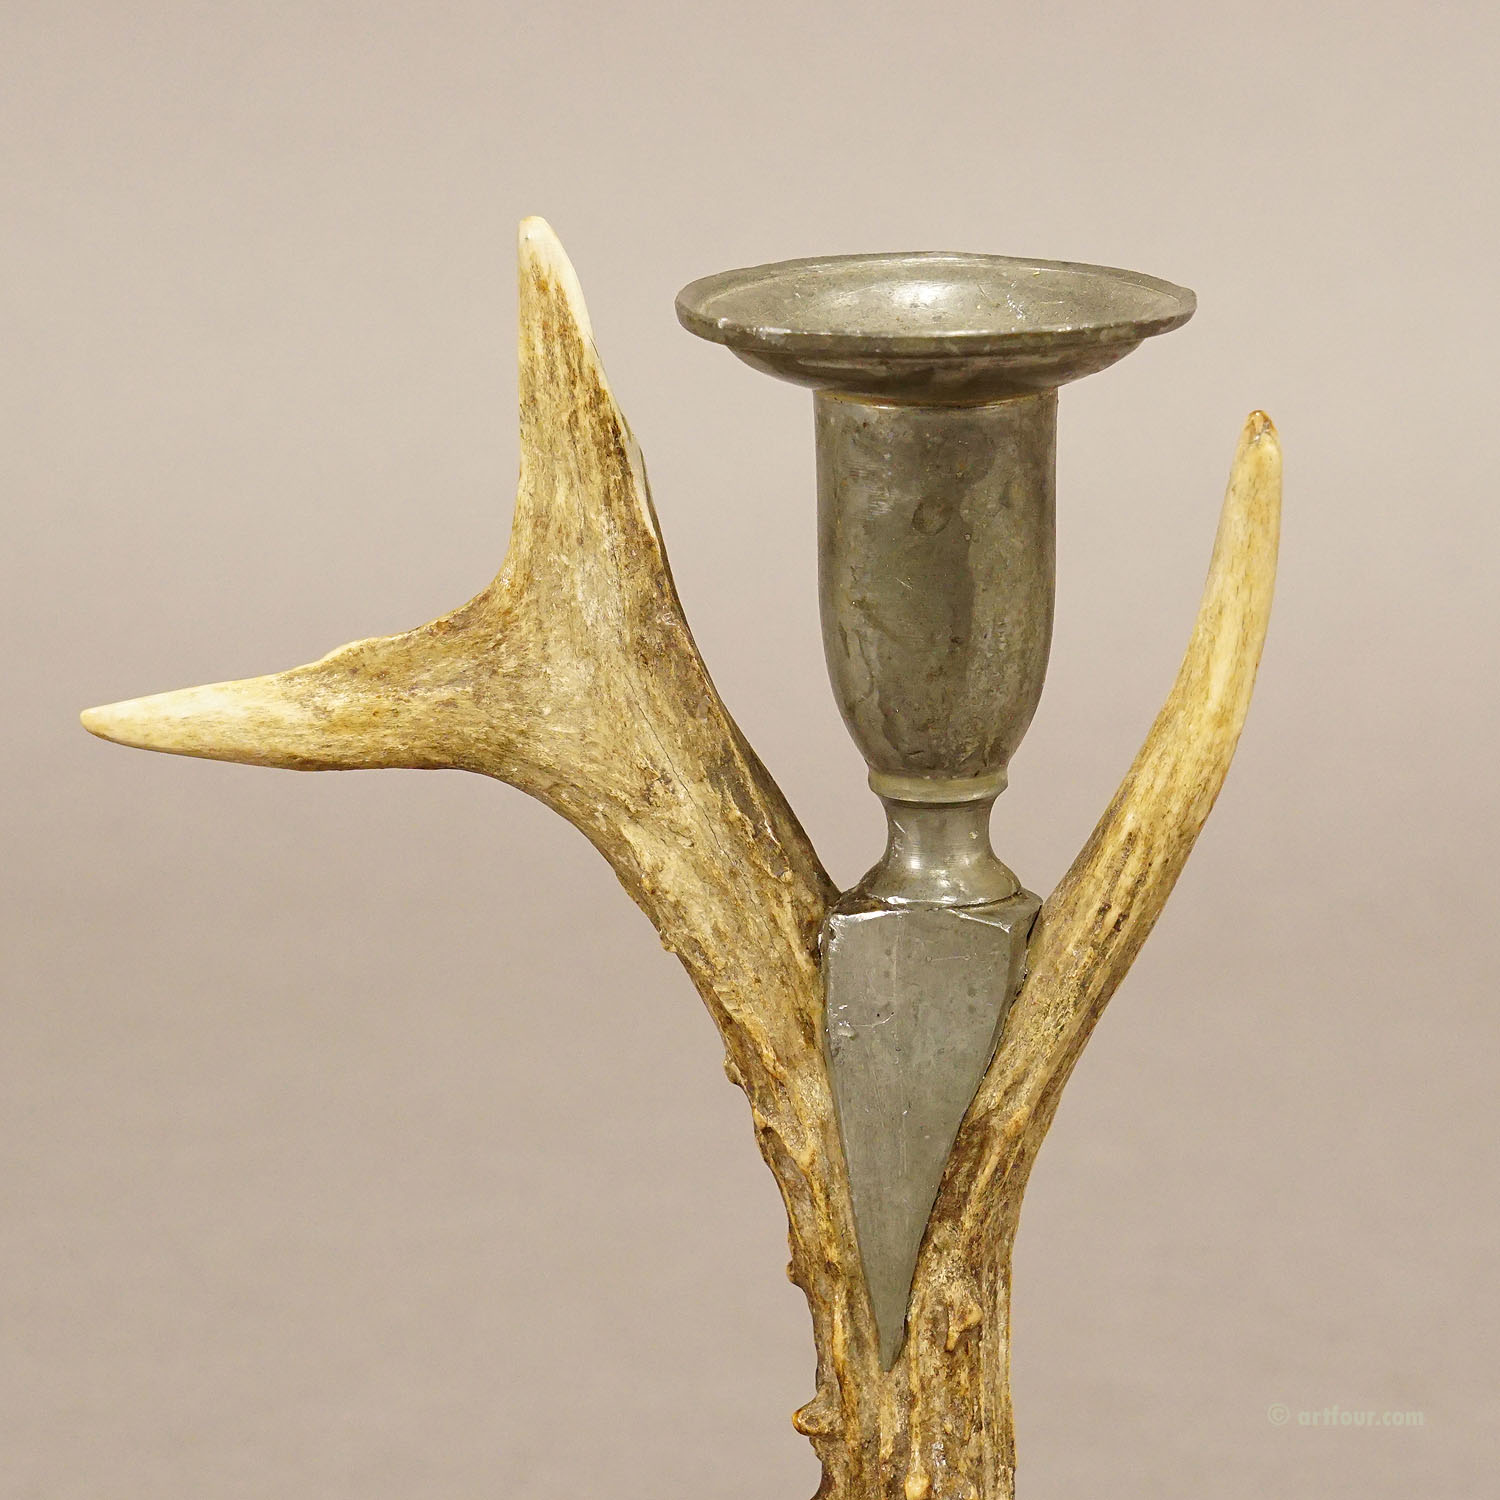 A Black Forest Candle Holder with Pewter Base and Spout, Germany ca. 1860s